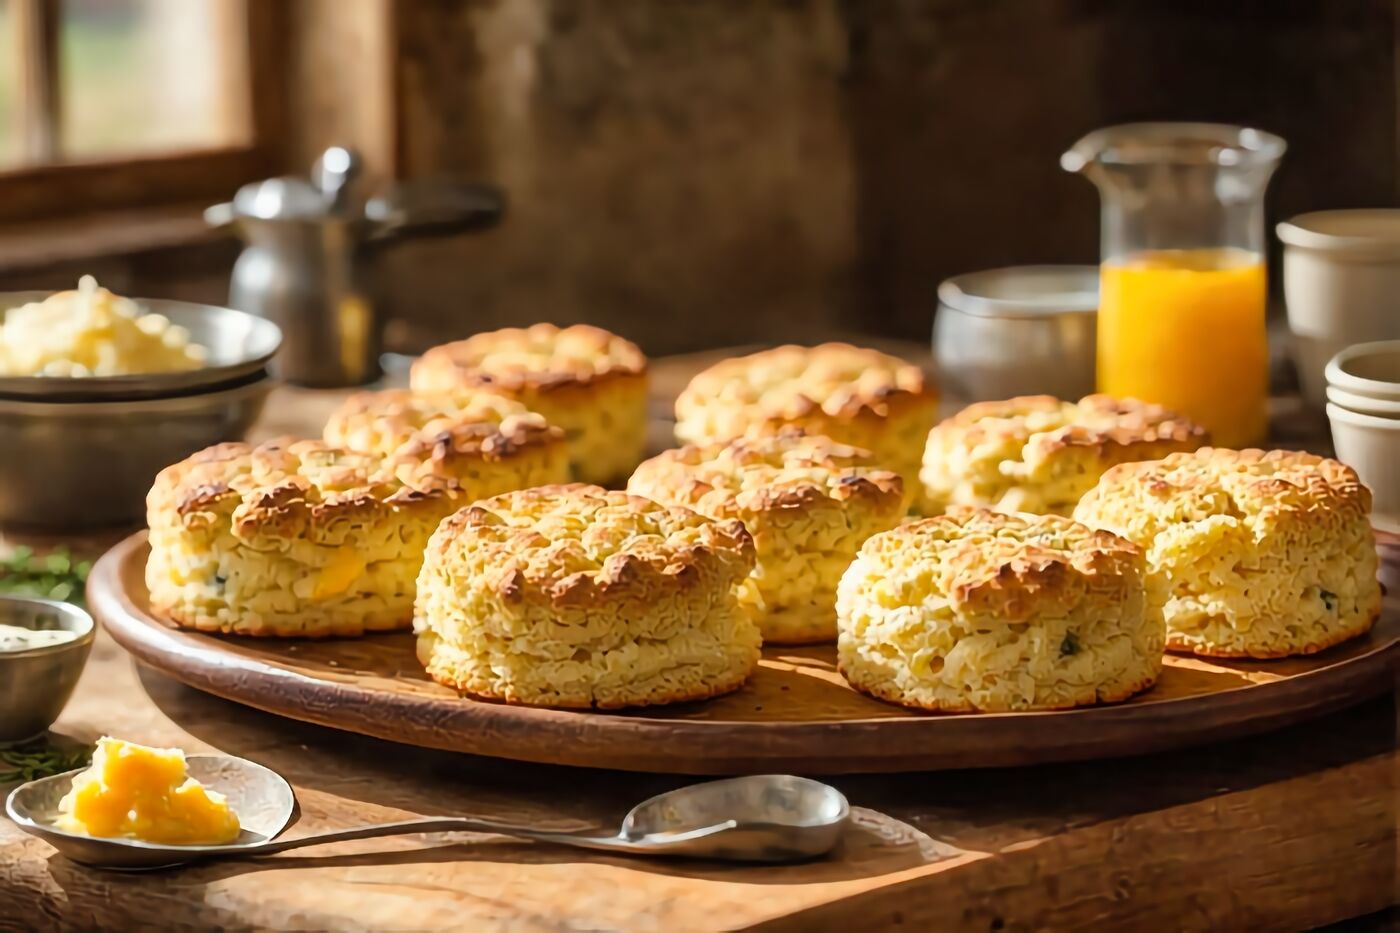 South African Cheese Scones Recipe